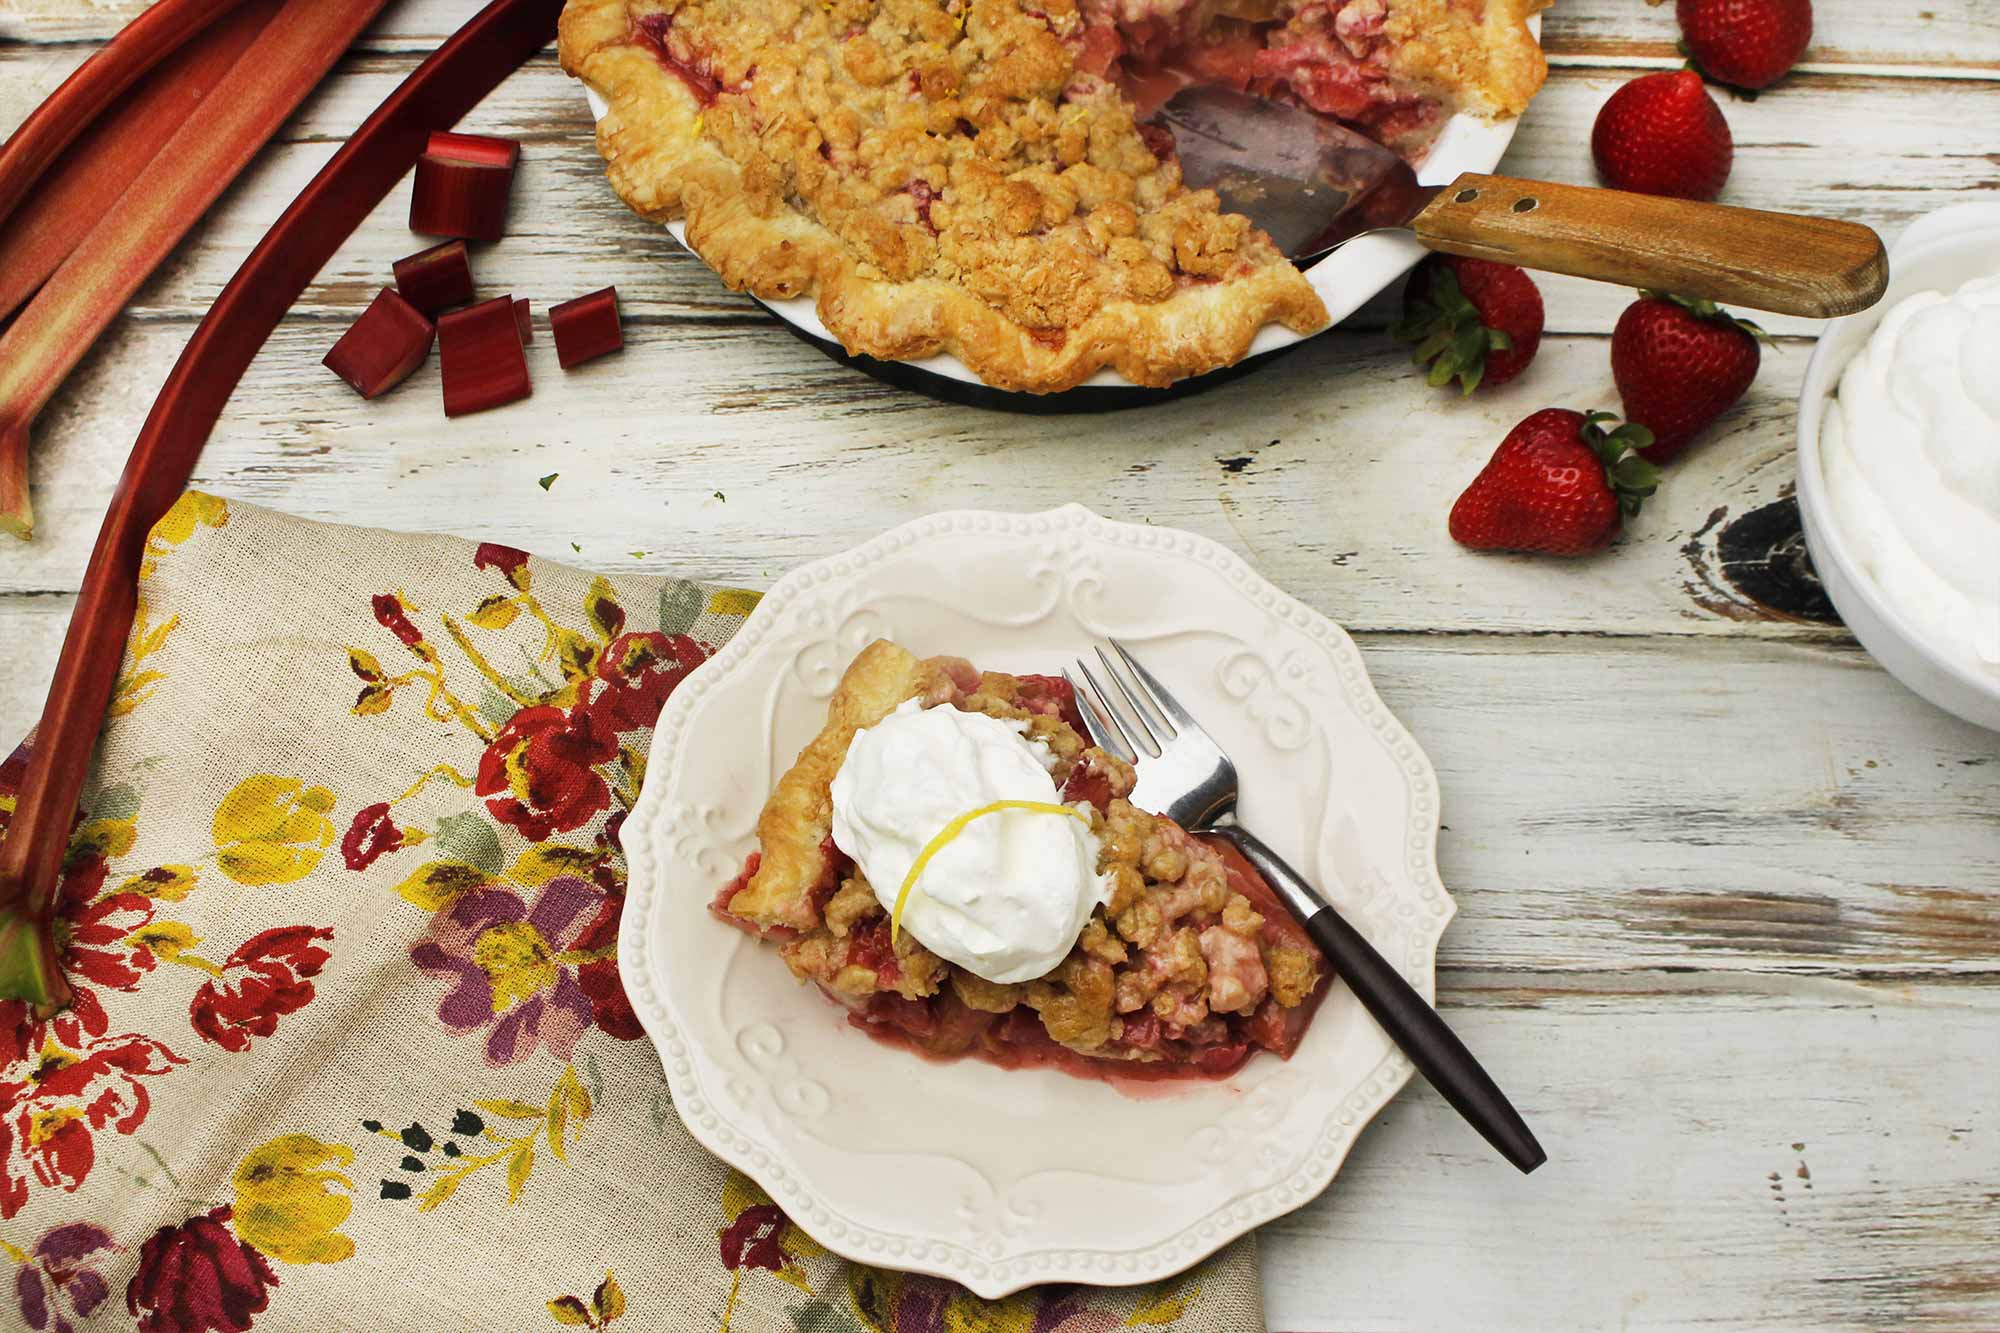 Strawberry Rhubarb Pie with Streusel Topping